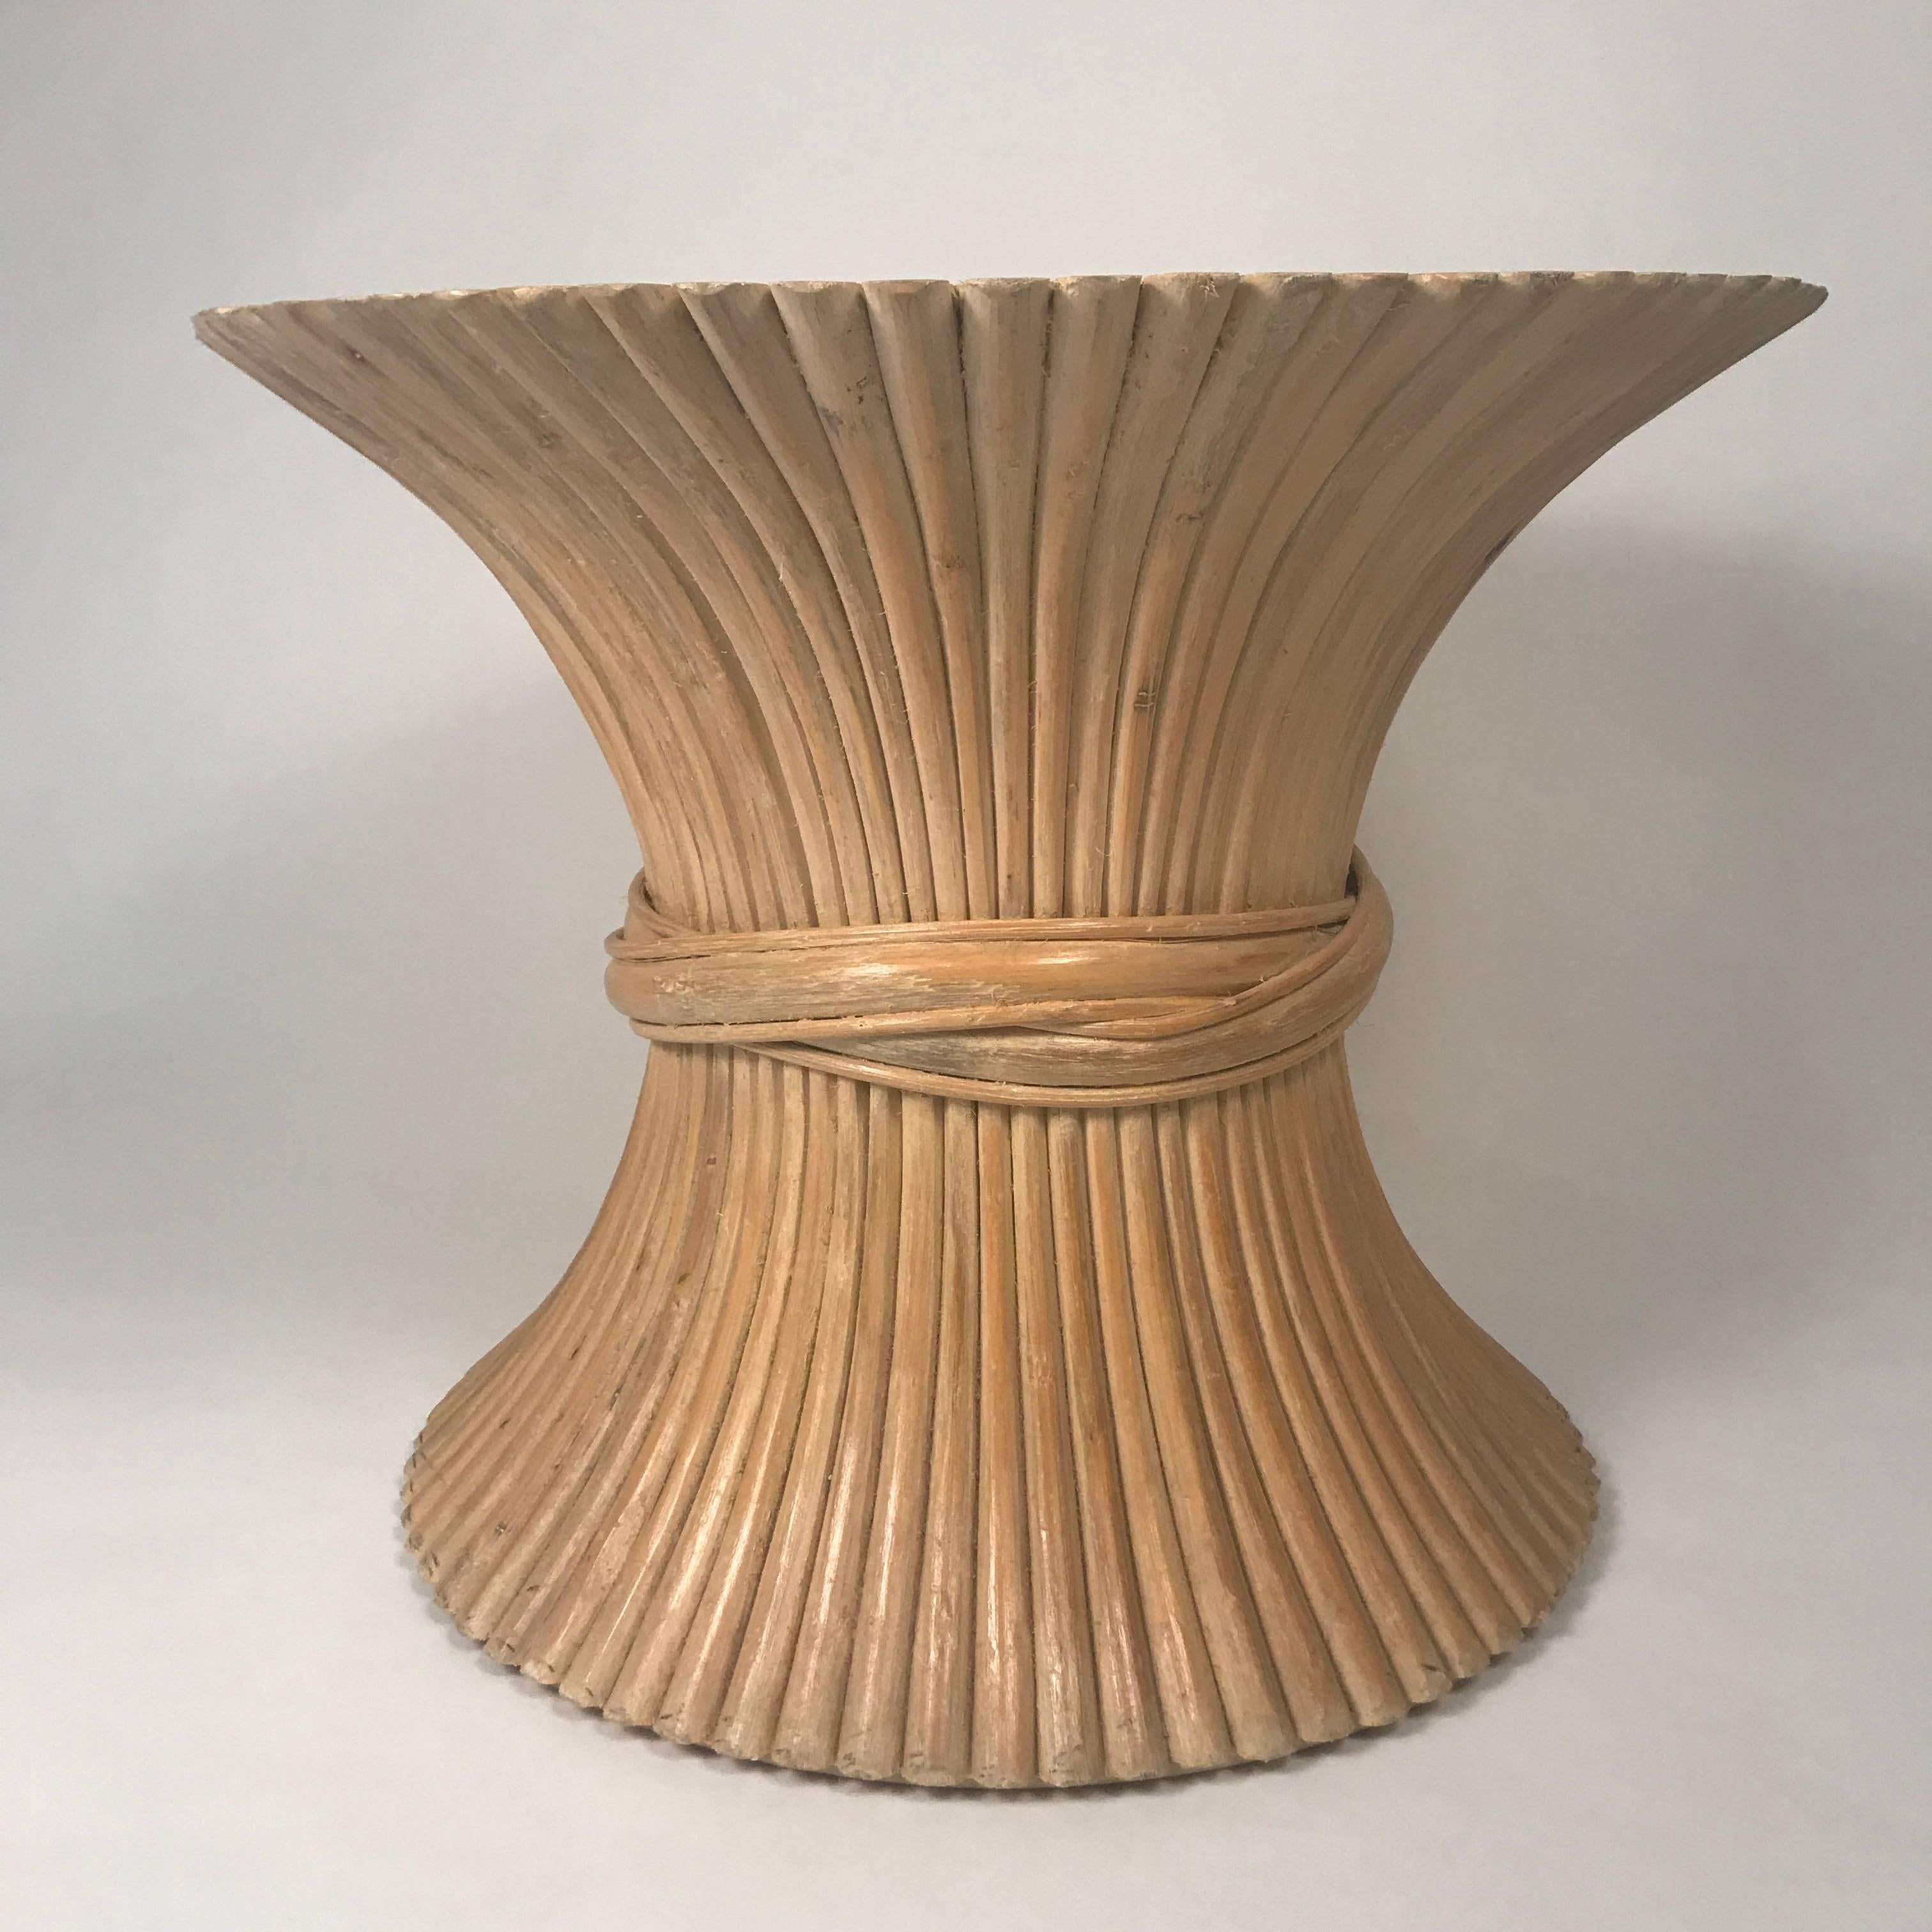 McGuire round sheaf of wheat bamboo table. Designed by the husband and wife team John and Elinor McGuire. Natural bamboo construction.

